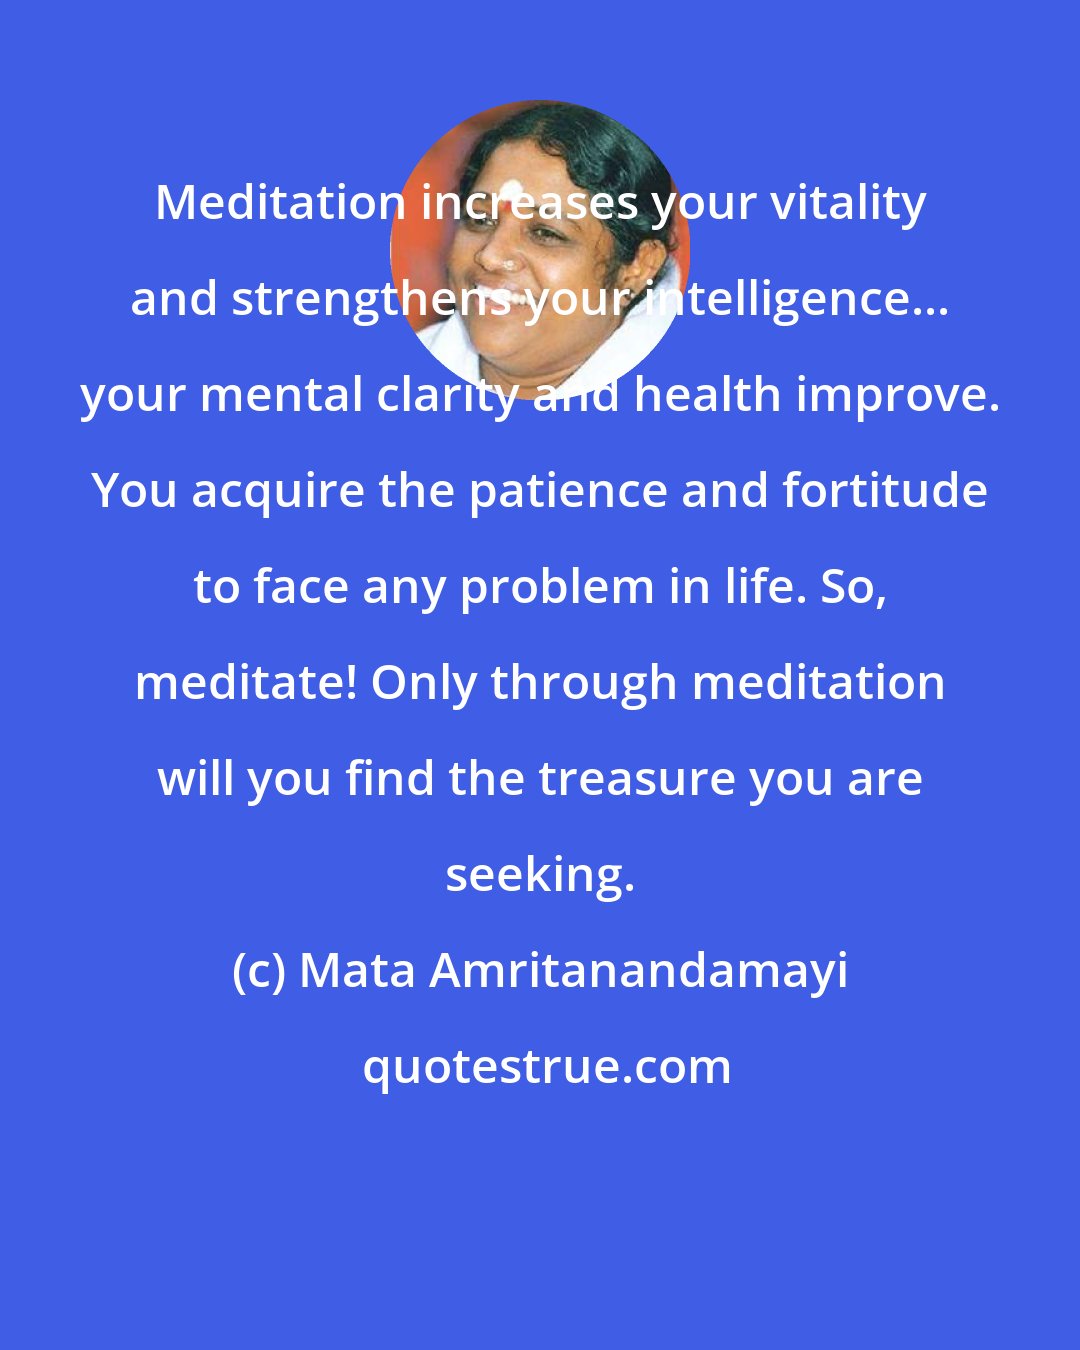 Mata Amritanandamayi: Meditation increases your vitality and strengthens your intelligence... your mental clarity and health improve. You acquire the patience and fortitude to face any problem in life. So, meditate! Only through meditation will you find the treasure you are seeking.